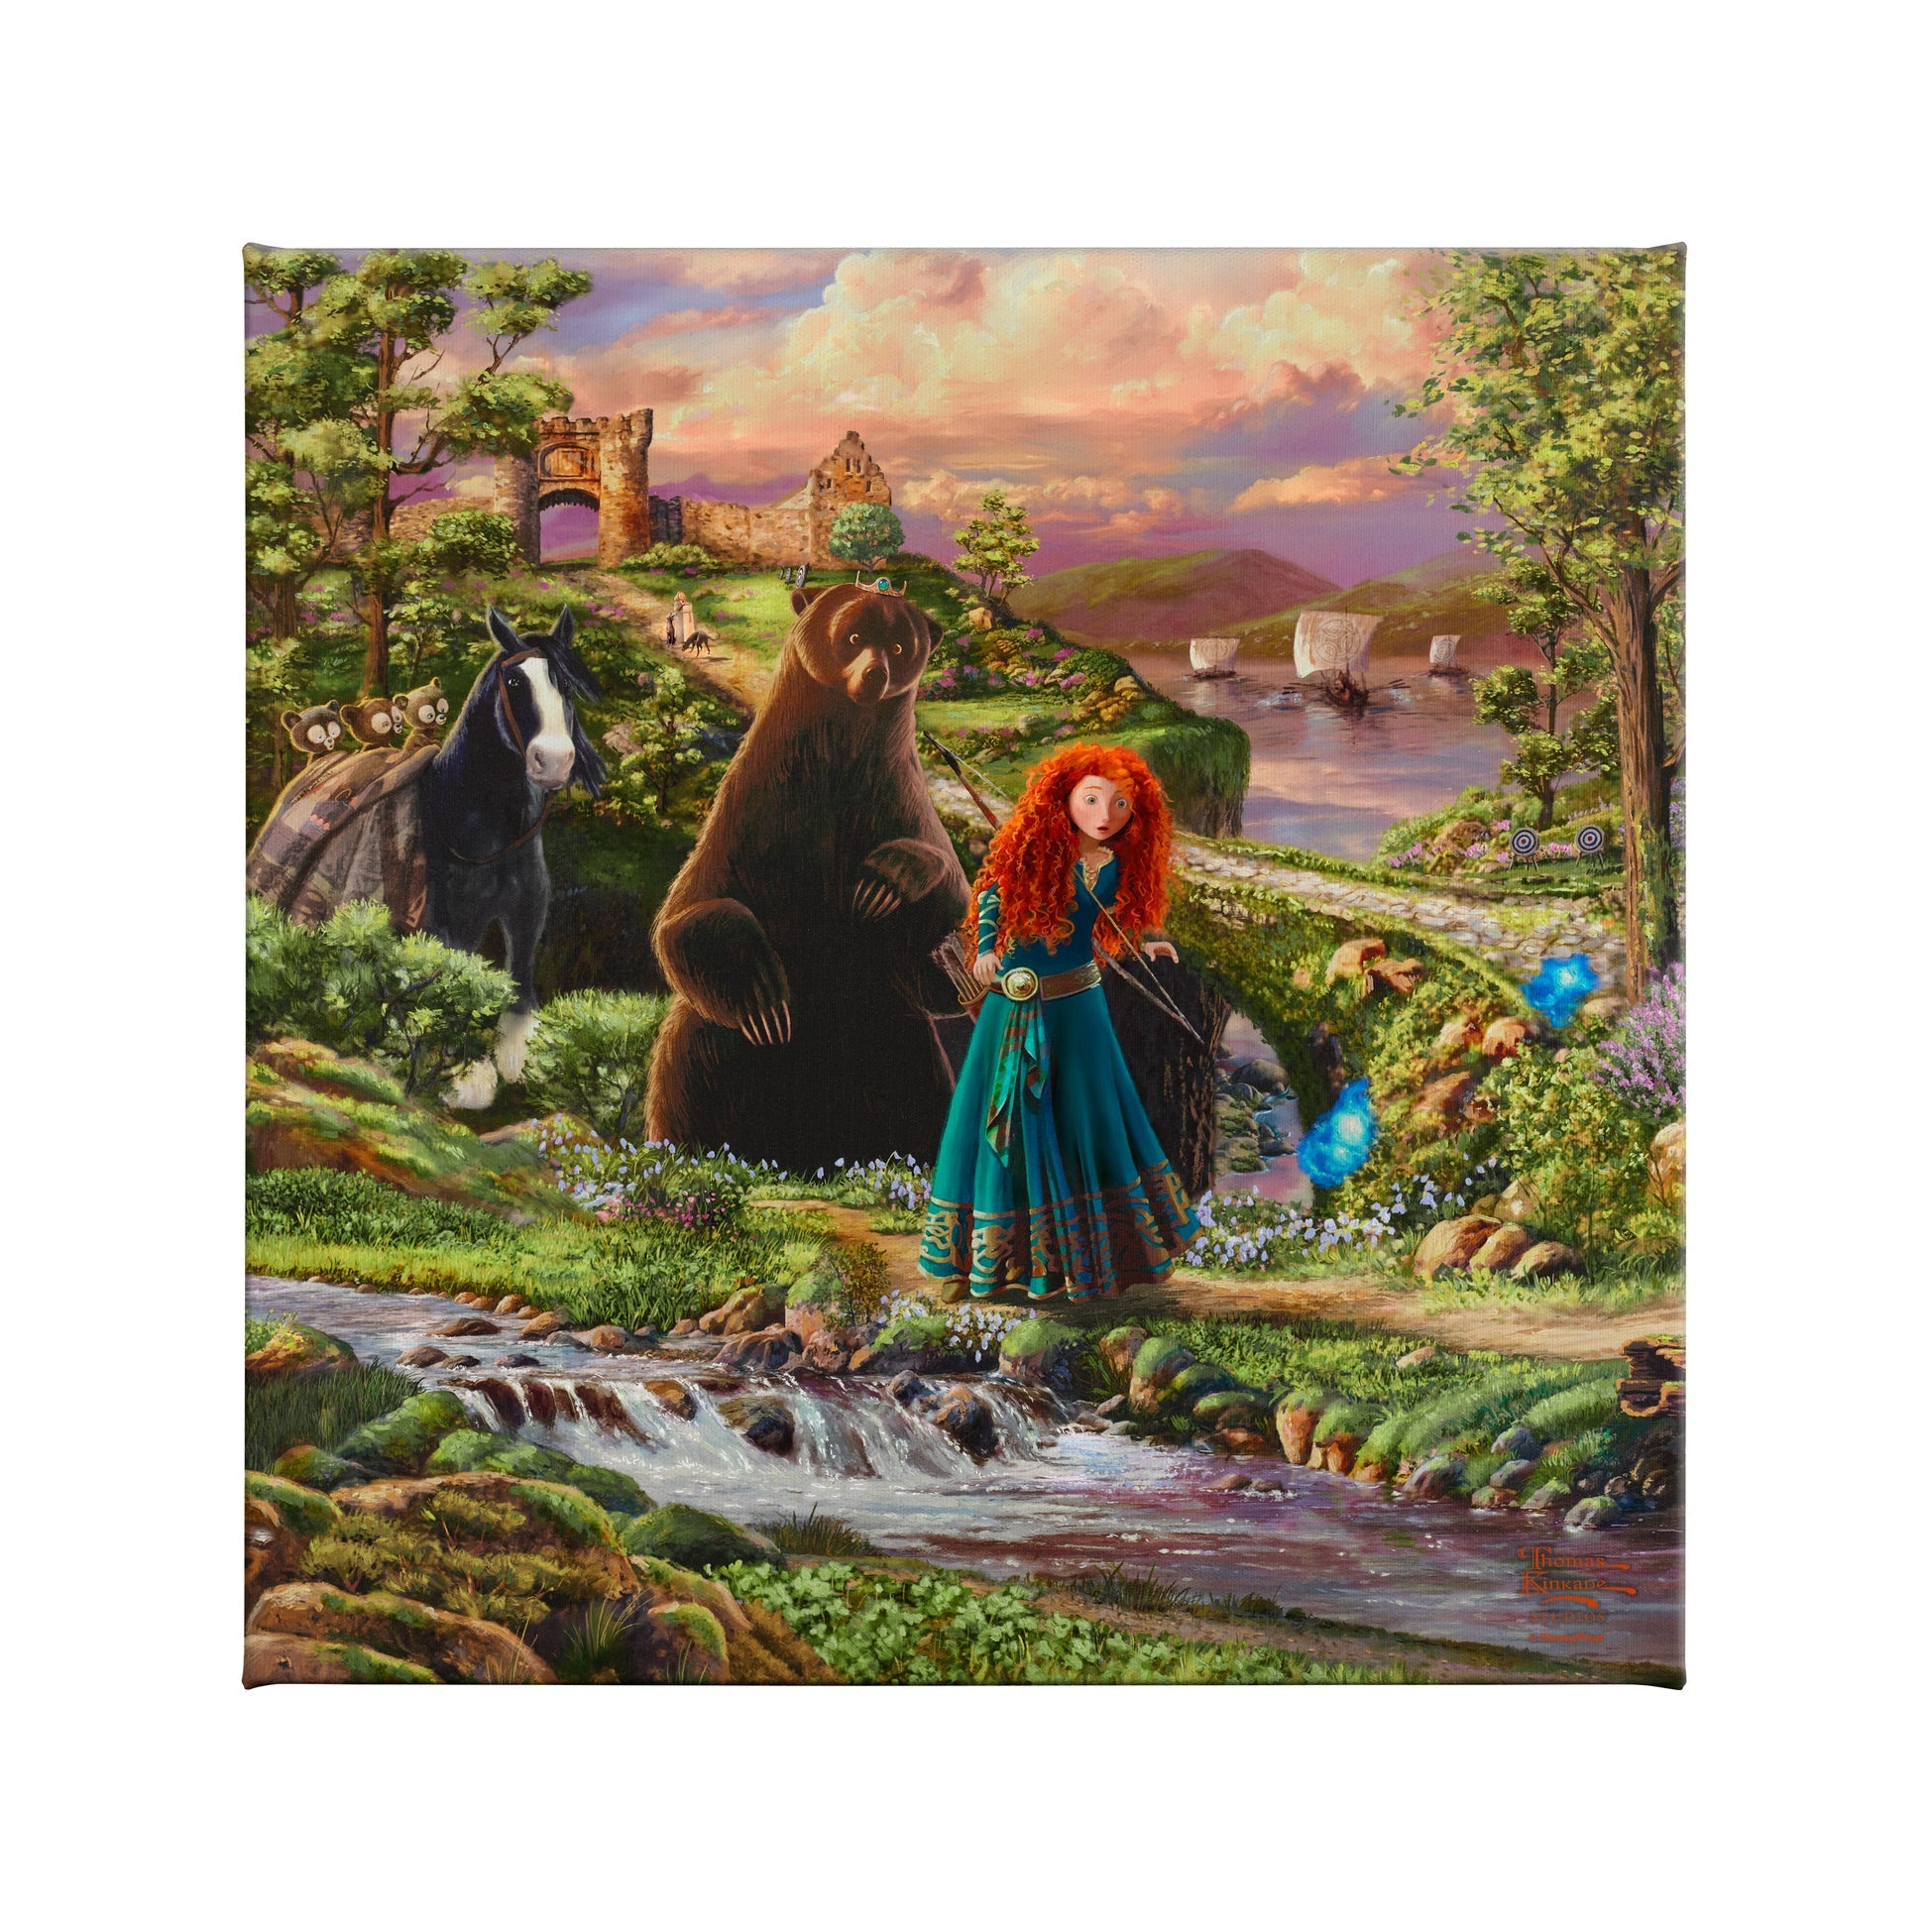 Merida is followed by her mother Queen Elinor who has been turned into a brown furry bear.